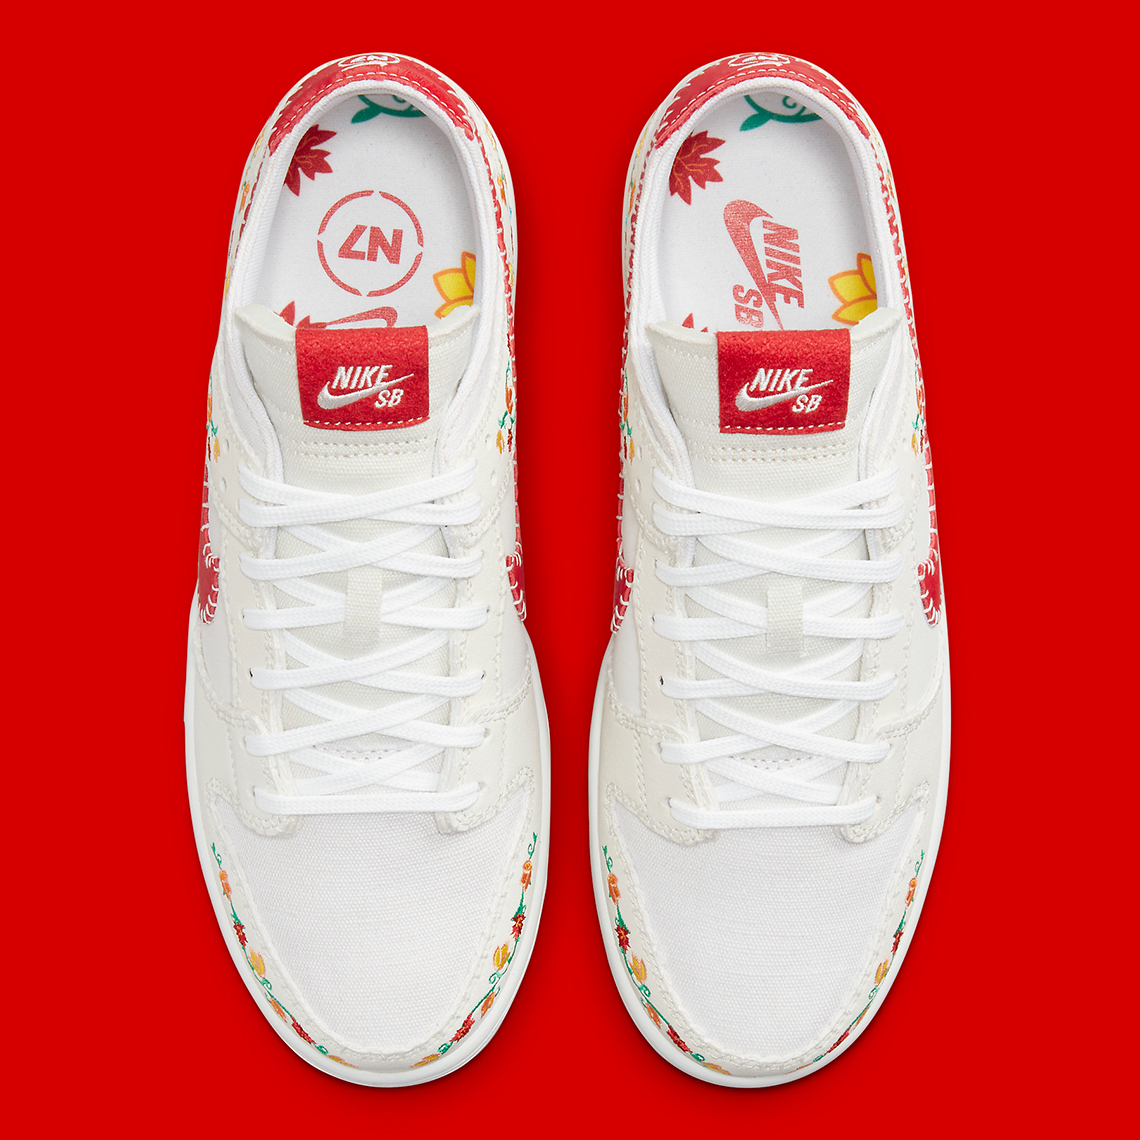 Nike Dunk Low Decon N7 White Red Fd6951 700 9